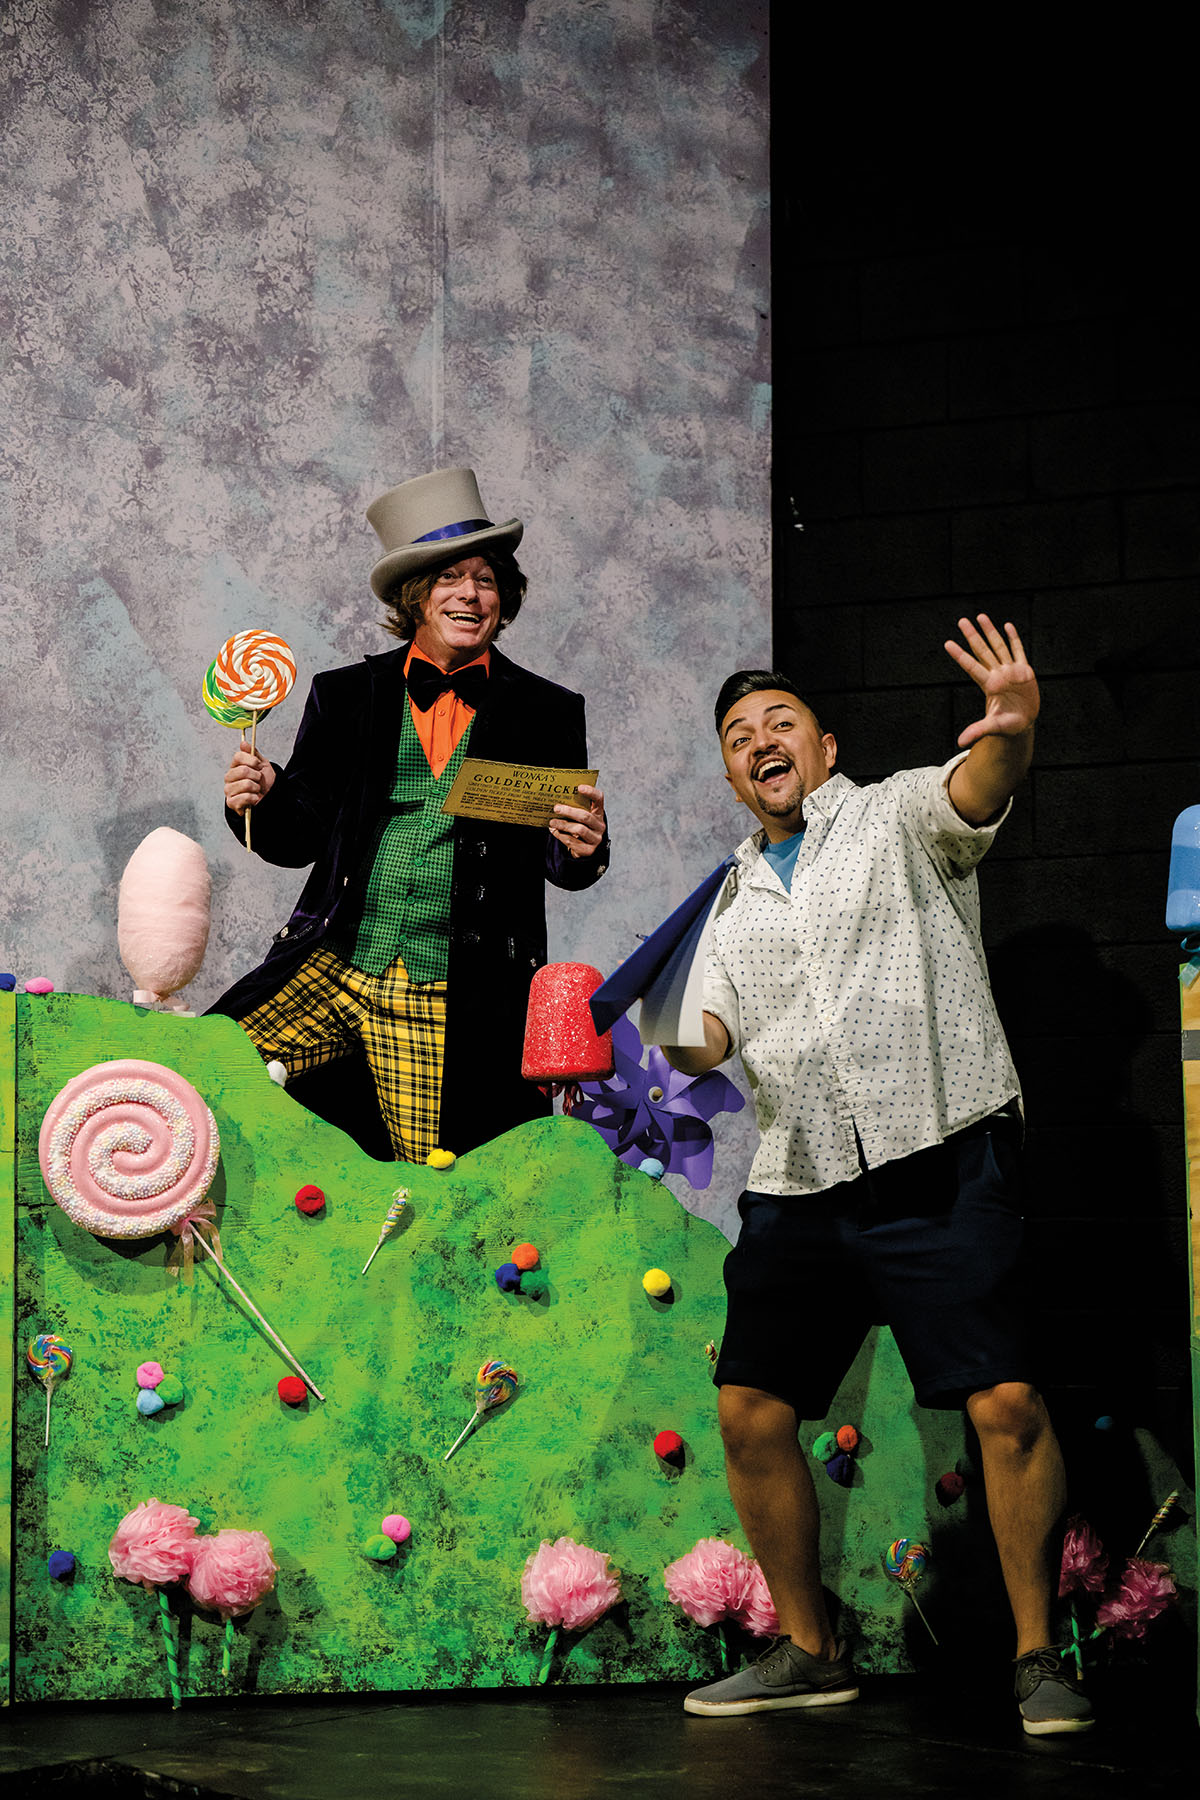 Two men, one in a brightly colored costume, rehearse under stage lights in a whimsical scene